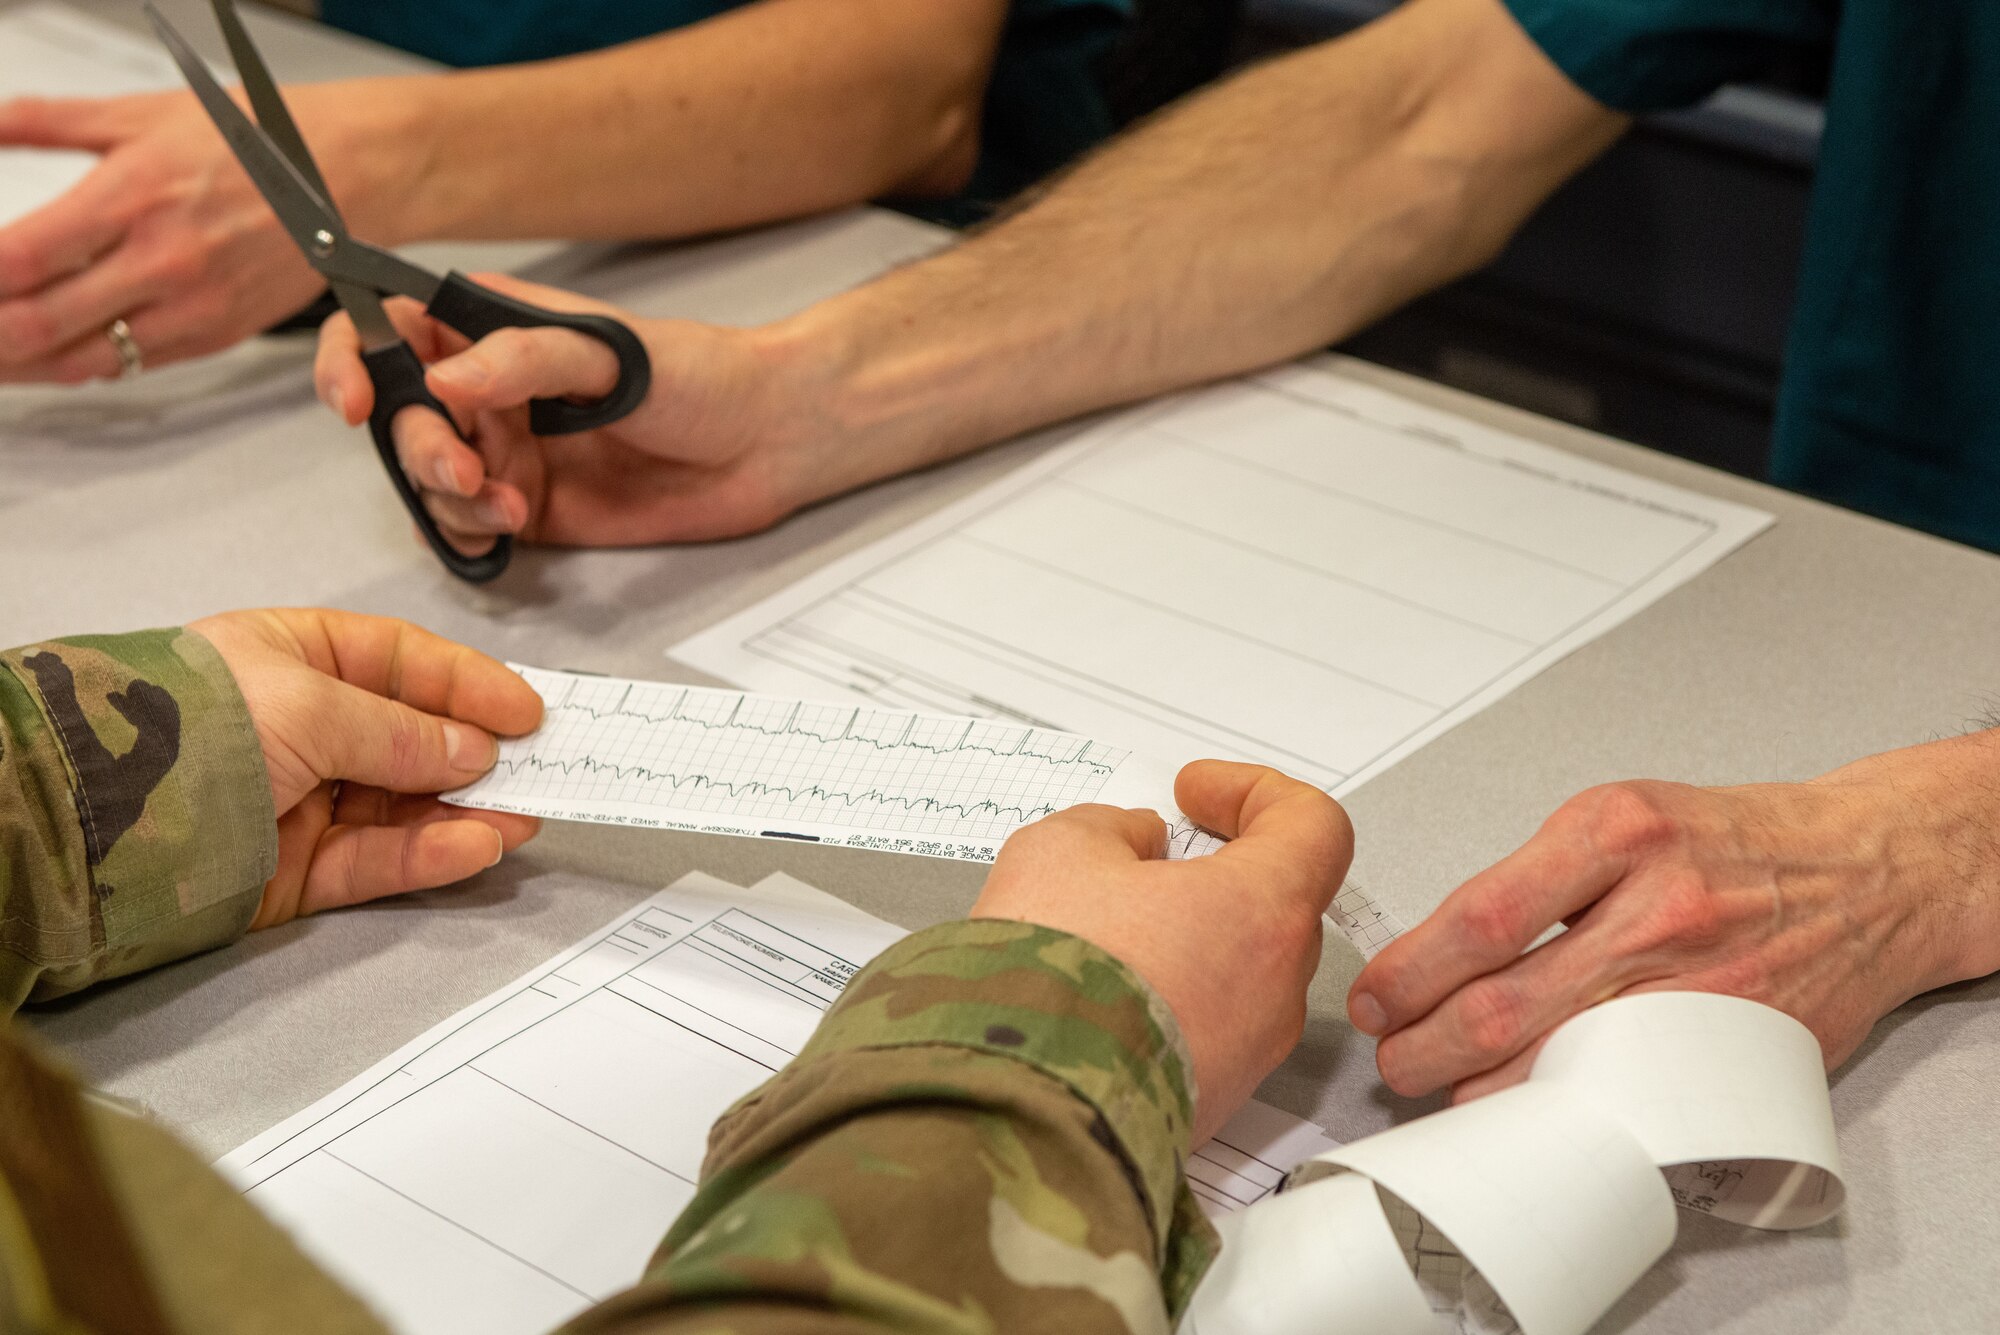 U.S. Air Force Master Sgt. Daniel Bierl, holding paper strip, 673d Inpatient Operations Squadron flight chief, and U.S. Air Force Chief Master Sgt. Lee Mills, holding scissors, JBER and 673d ABW command chief, practice cardiac tracing during a 673d IPTS immersion at Joint Base Elmendorf-Richardson, Alaska, Feb. 26, 2021. The tour familiarized base leadership with the 673d IPTS and its role in supporting readiness. The 673d IPTS provides a full range of medical care to include perinatal care, intensive care, and behavioral health services to JBER and the greater Anchorage area.